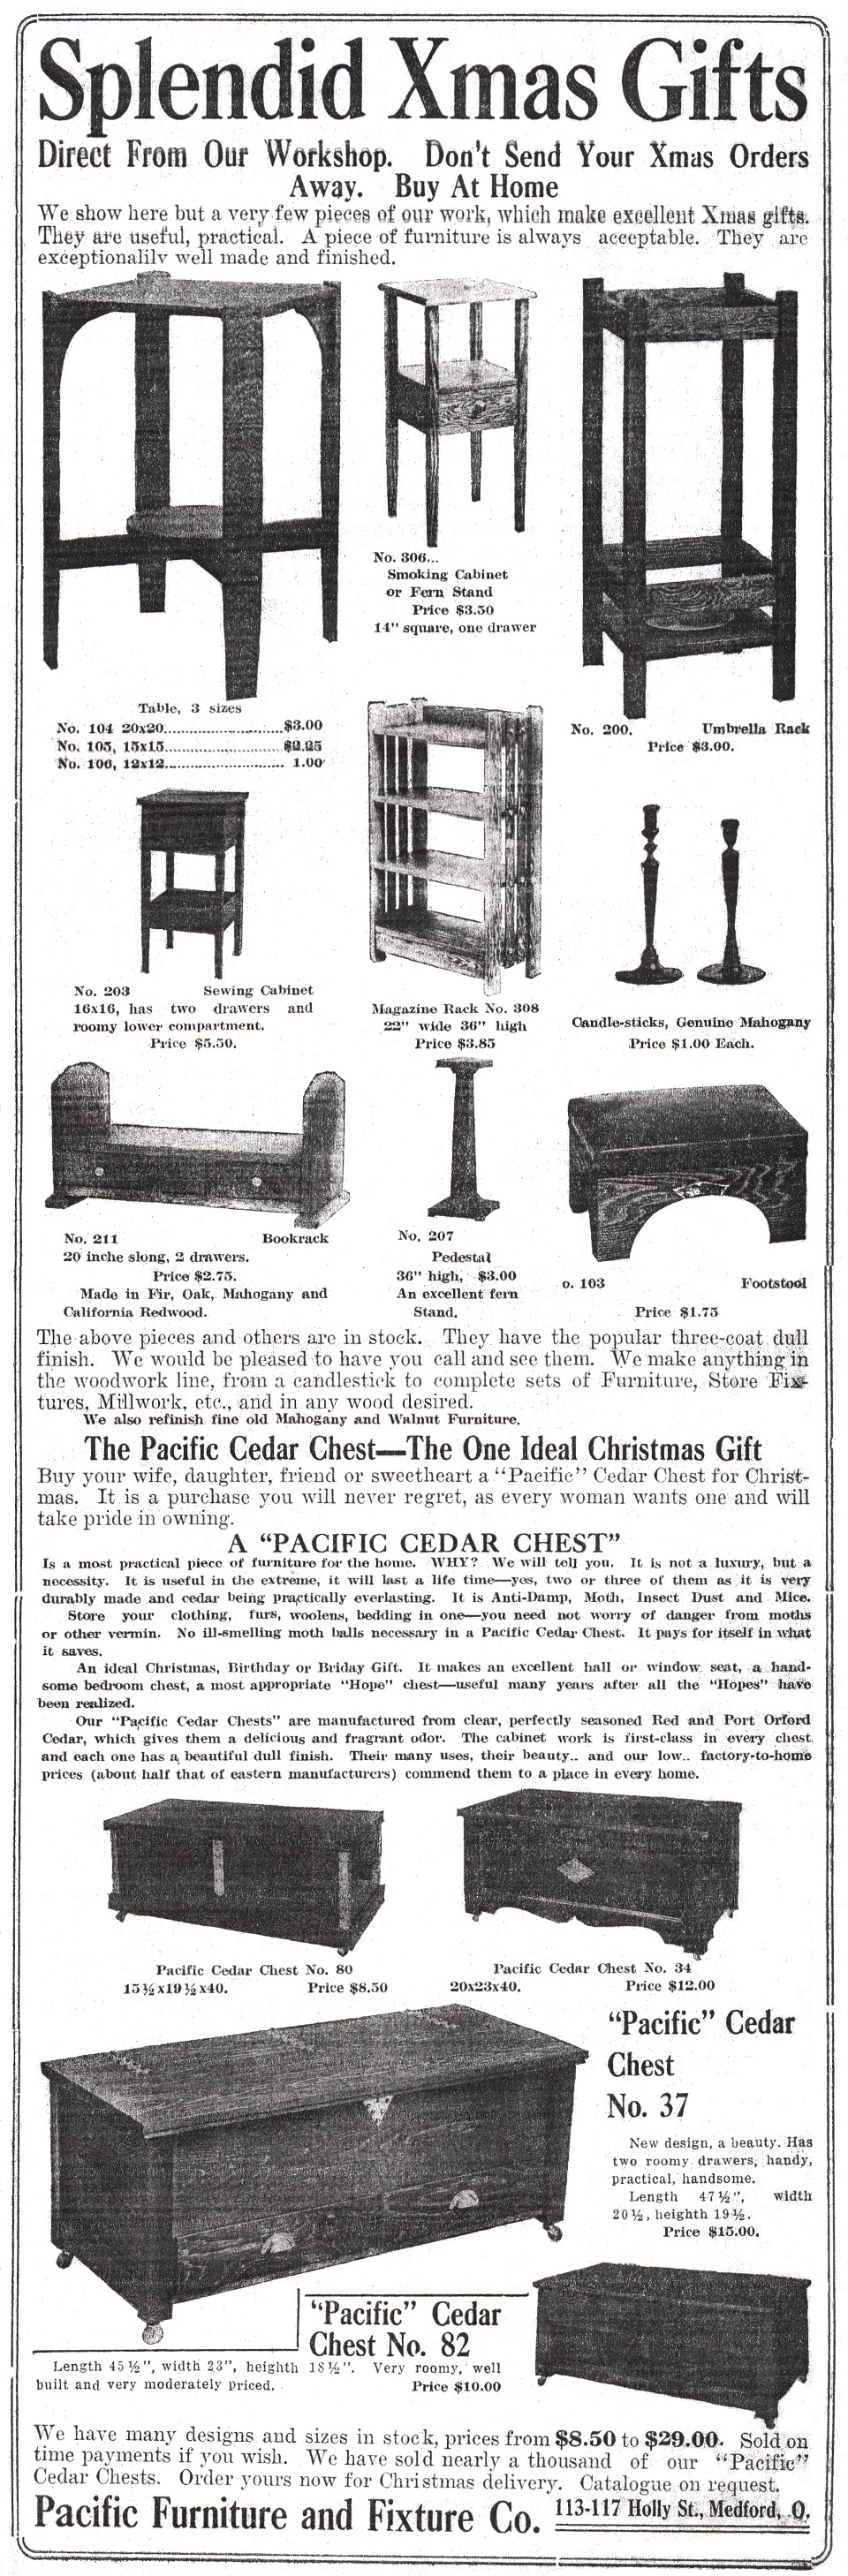 Pacific Furniture and Fixture Co. ad, December 17, 1916 Medford Mail Tribune